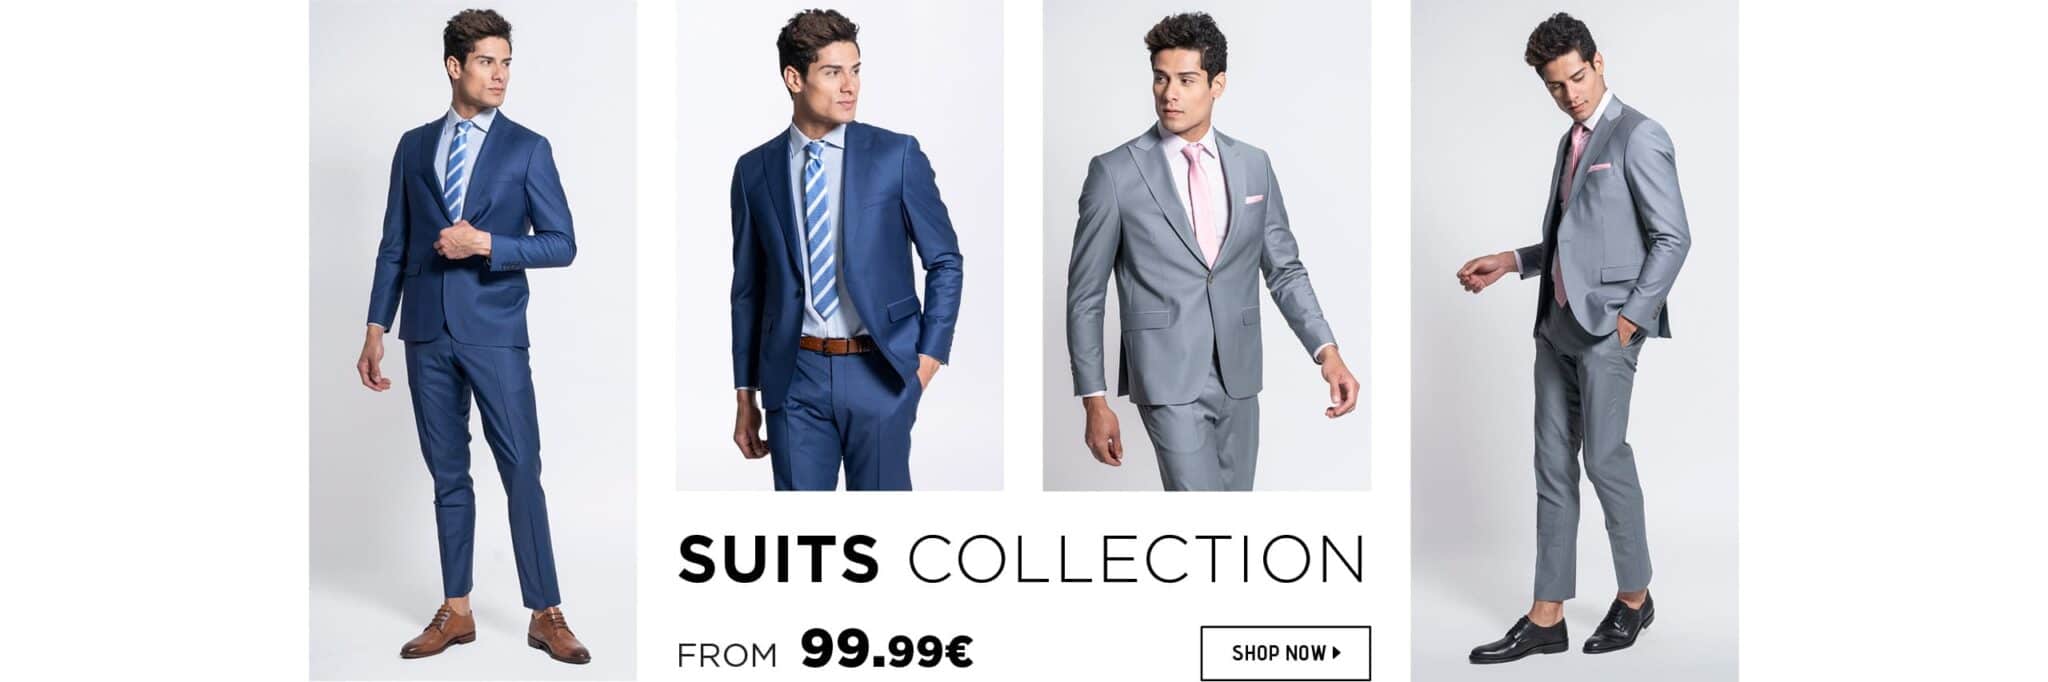 Prince Oliver Suits Collection from 99.99€